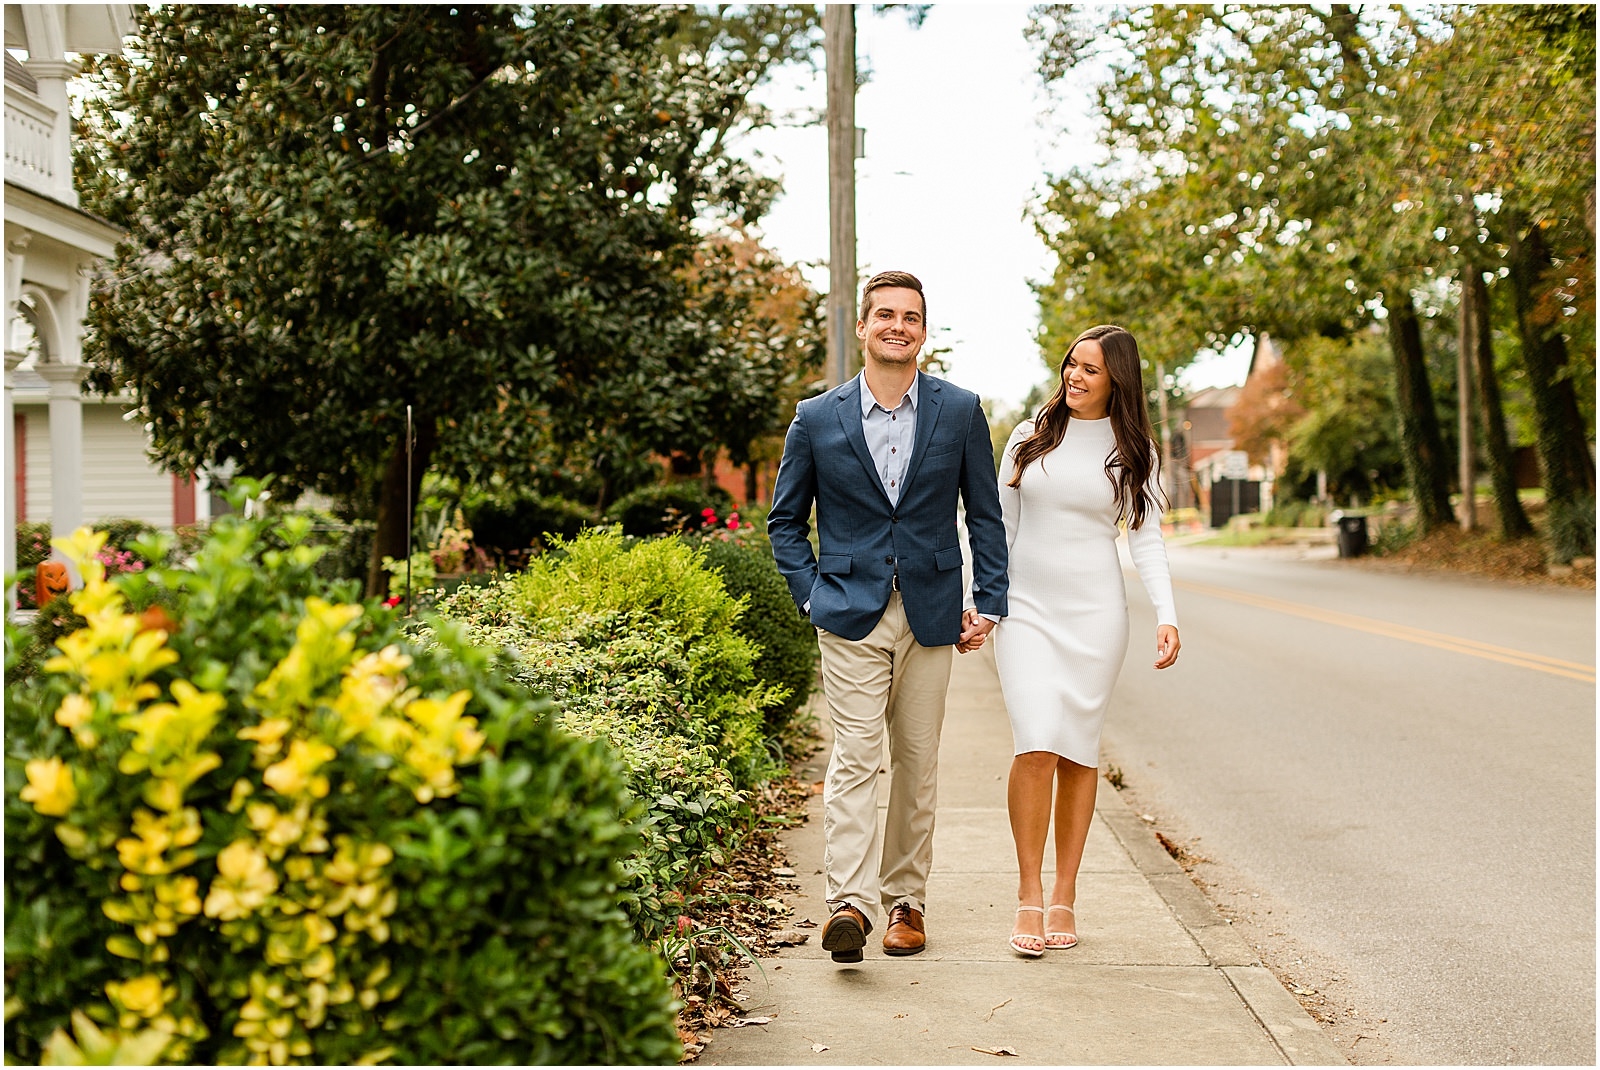 Emma and Jace's Downtown Newburgh Engagement Session | Bret and Brandie Photography | Evansville Indiana Wedding Photographers_0021.jpg